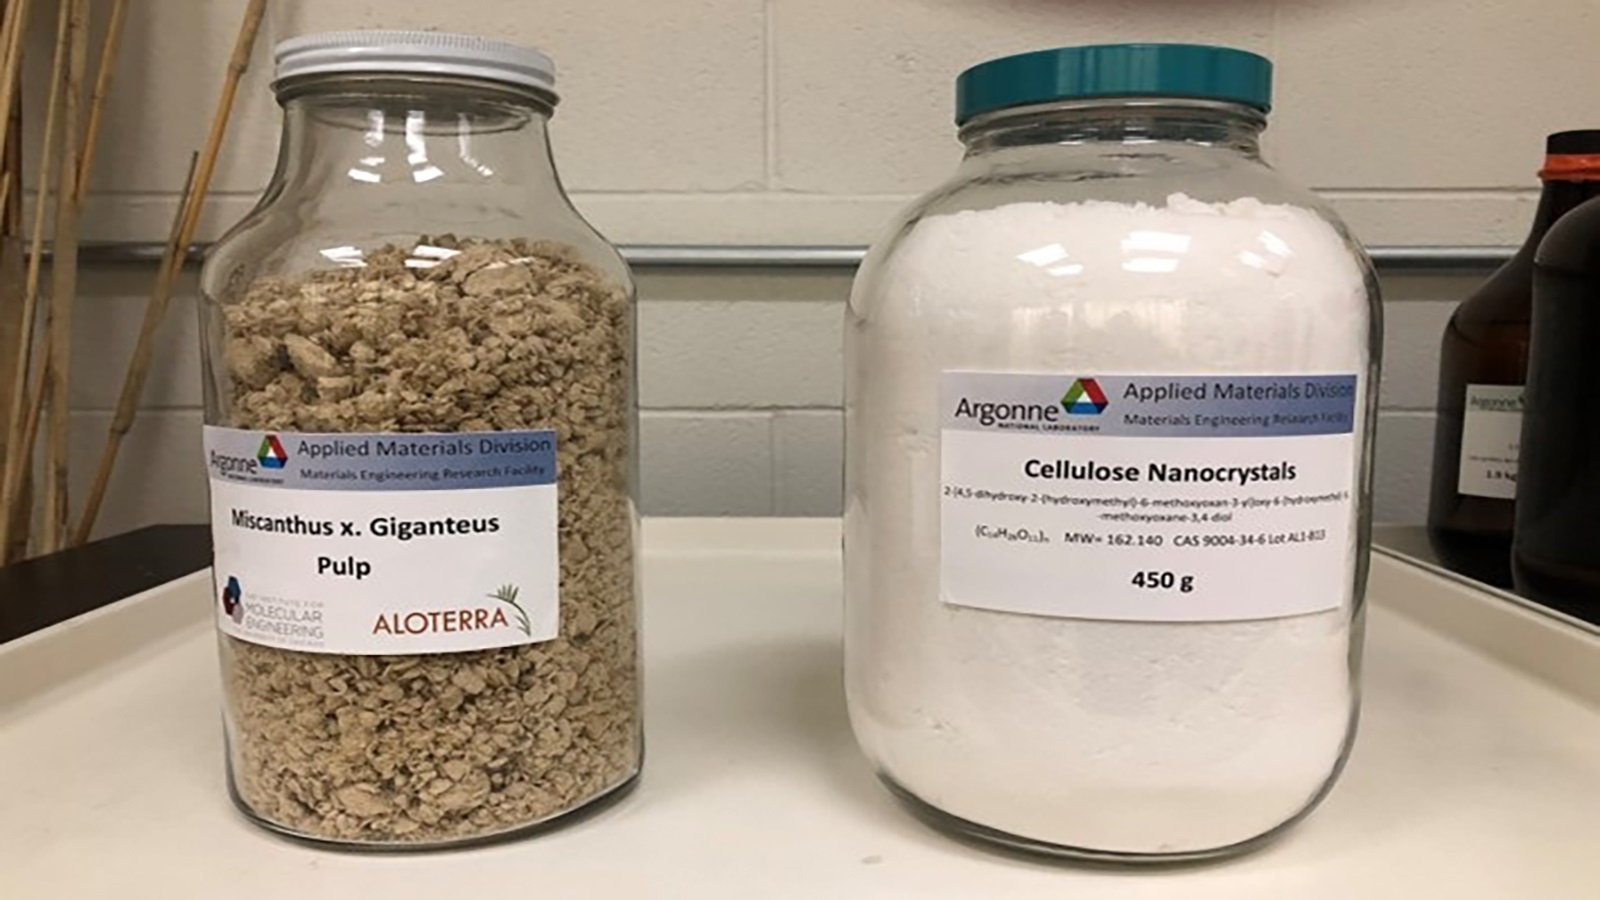 UChicago researchers discovered a way to extract cellulose nanocrystals (CNCs) from Miscanthus x. Giganteus, a fast-growing grass.